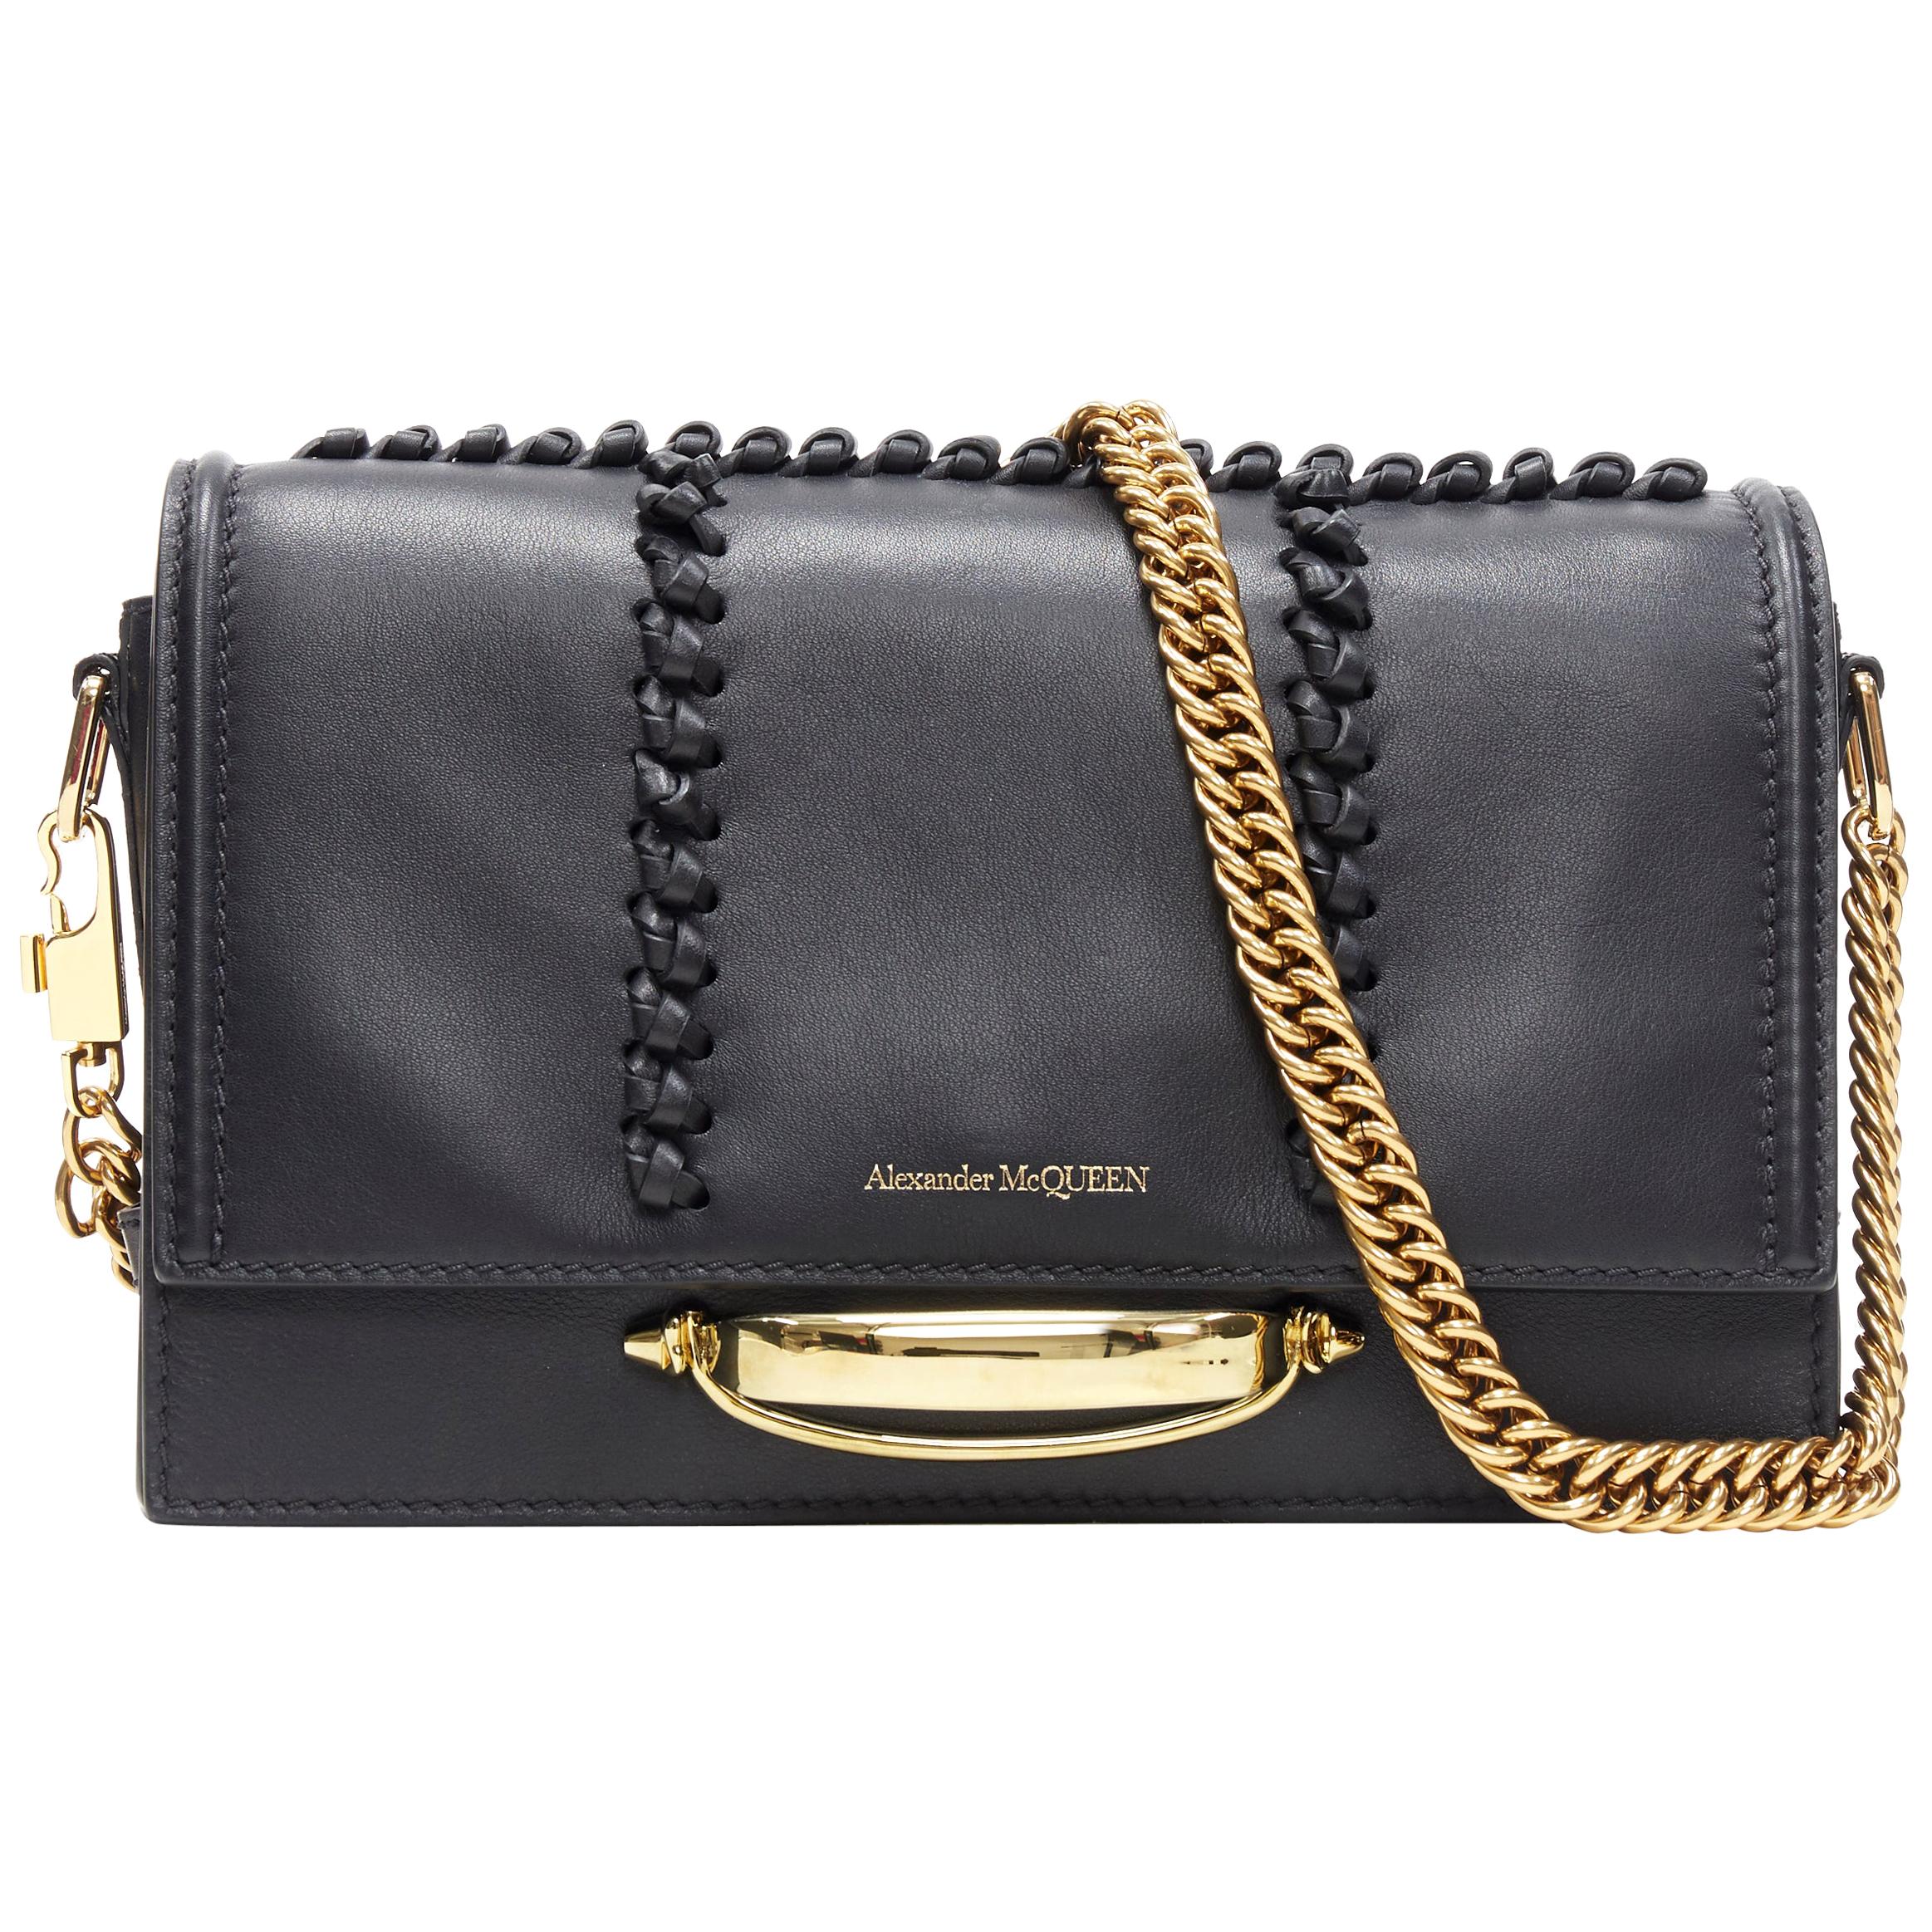 new ALEXANDER MCQUEEN The Story black leather whipstitch gold knuckle chain bag